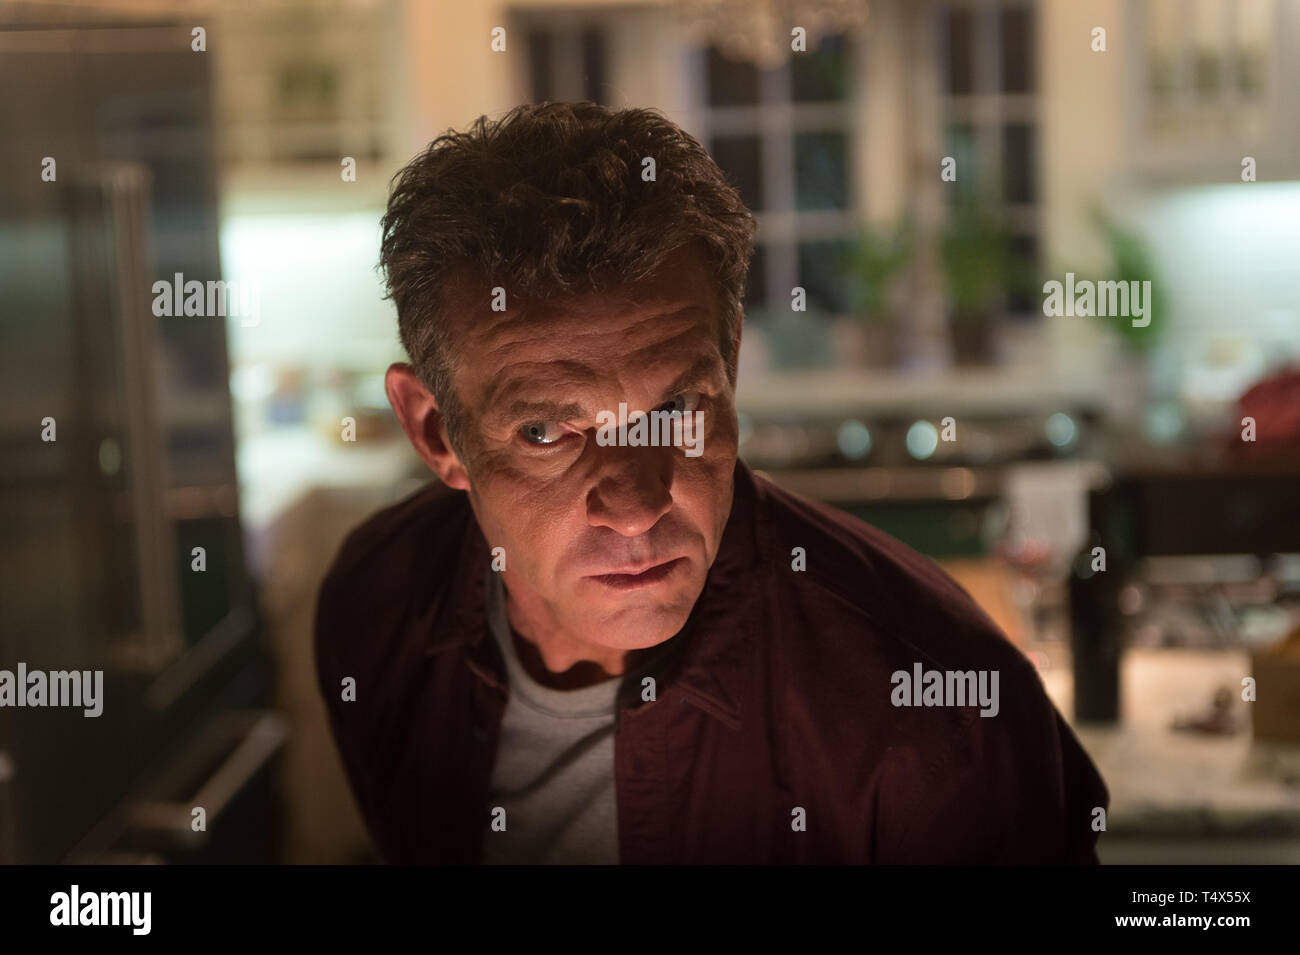 RELEASE DATE: May 3, 2019 TITLE: The Intruder STUDIO: Screen Gems DIRECTOR: Deon Taylor PLOT: A young married couple buy a beautiful house on several acres of land only to find out that the man they bought it from refuses to let go of the property. STARRING: DENNIS QUAID as Charlie Peck. (Credit Image: © Screen Gems/Entertainment Pictures) Stock Photo